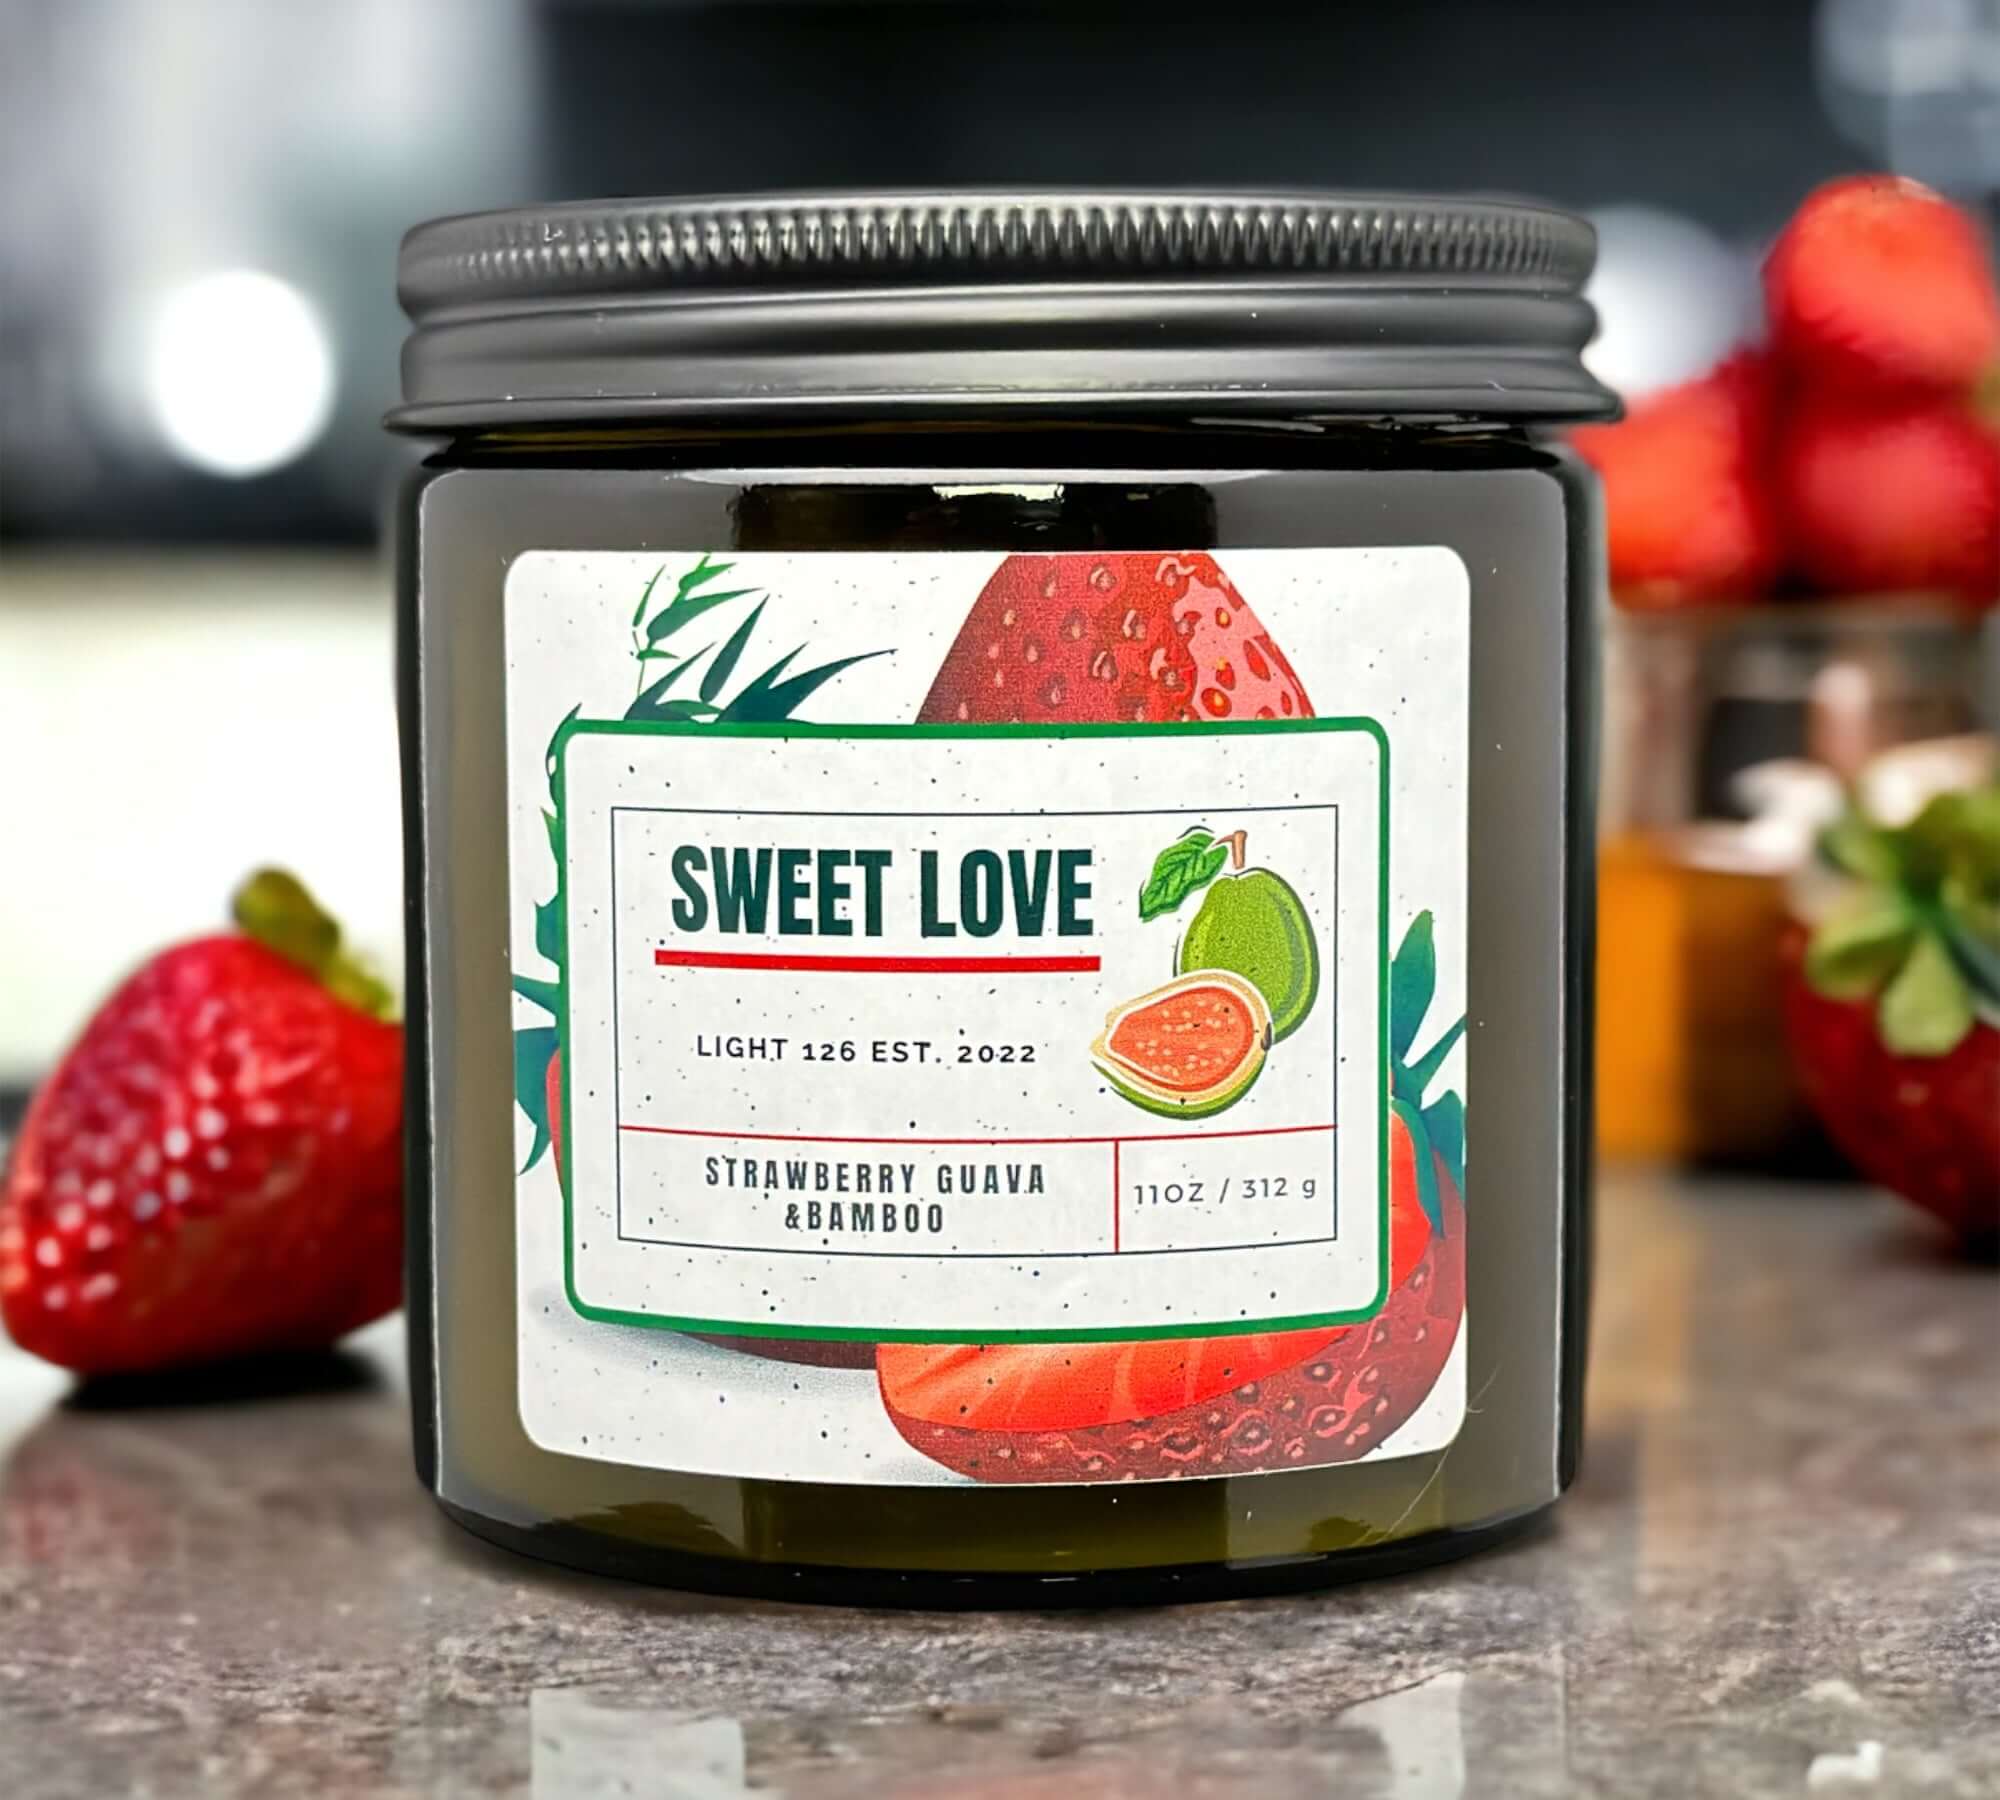 Sweet love candle. Strawberry Guava and bamboo candle.